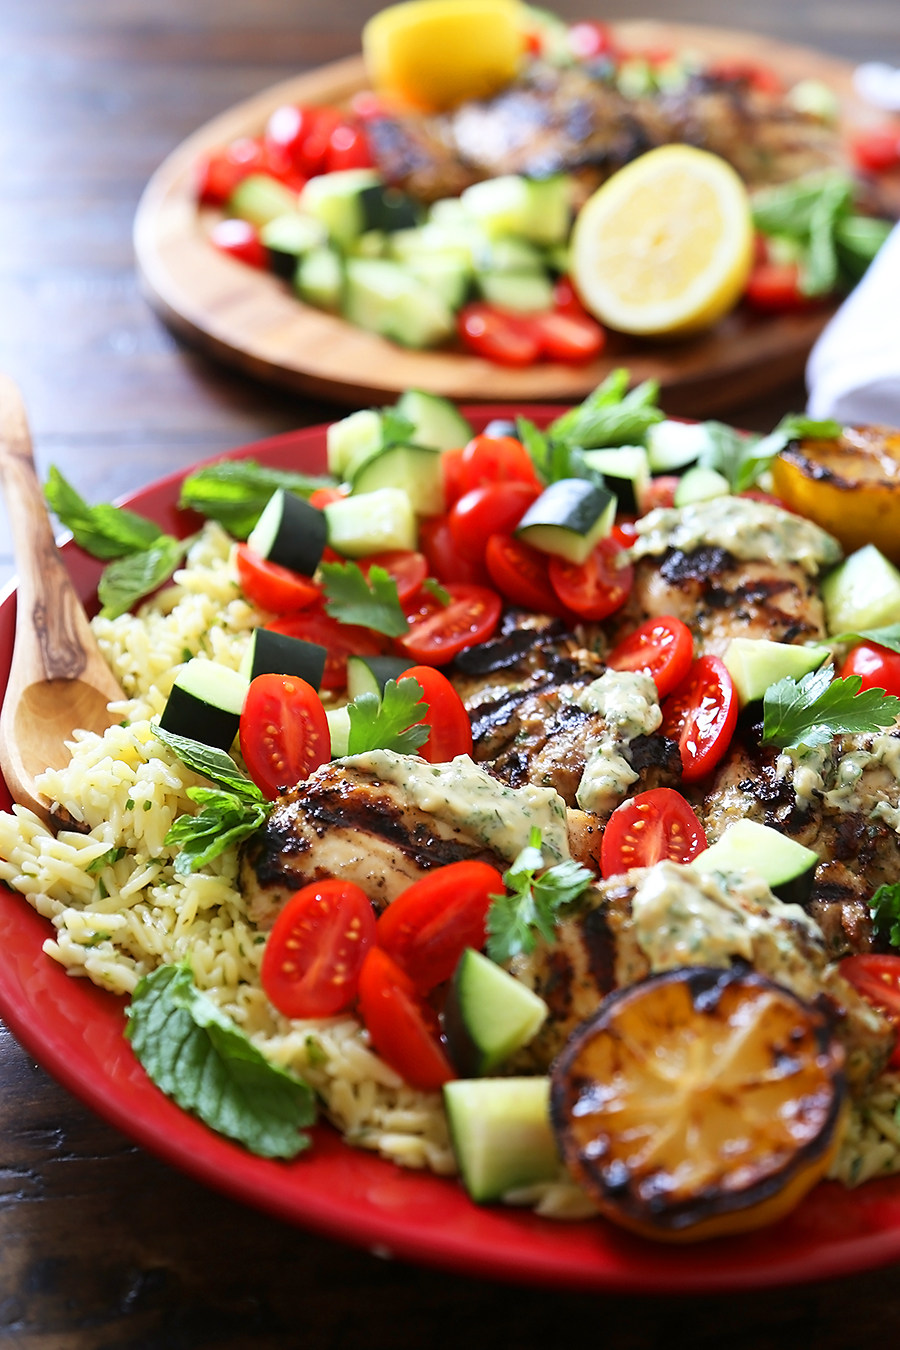 Greek Tahini Chicken with Cucumber, Tomato and Lemon Orzo Salad - Smoky, tender marinated chicken thighs with a creamy tahini sauce, fresh veggies, orzo and a squeeze of lemon! Full of nutritious, hearty goodness! Thecomfortofcooking.com